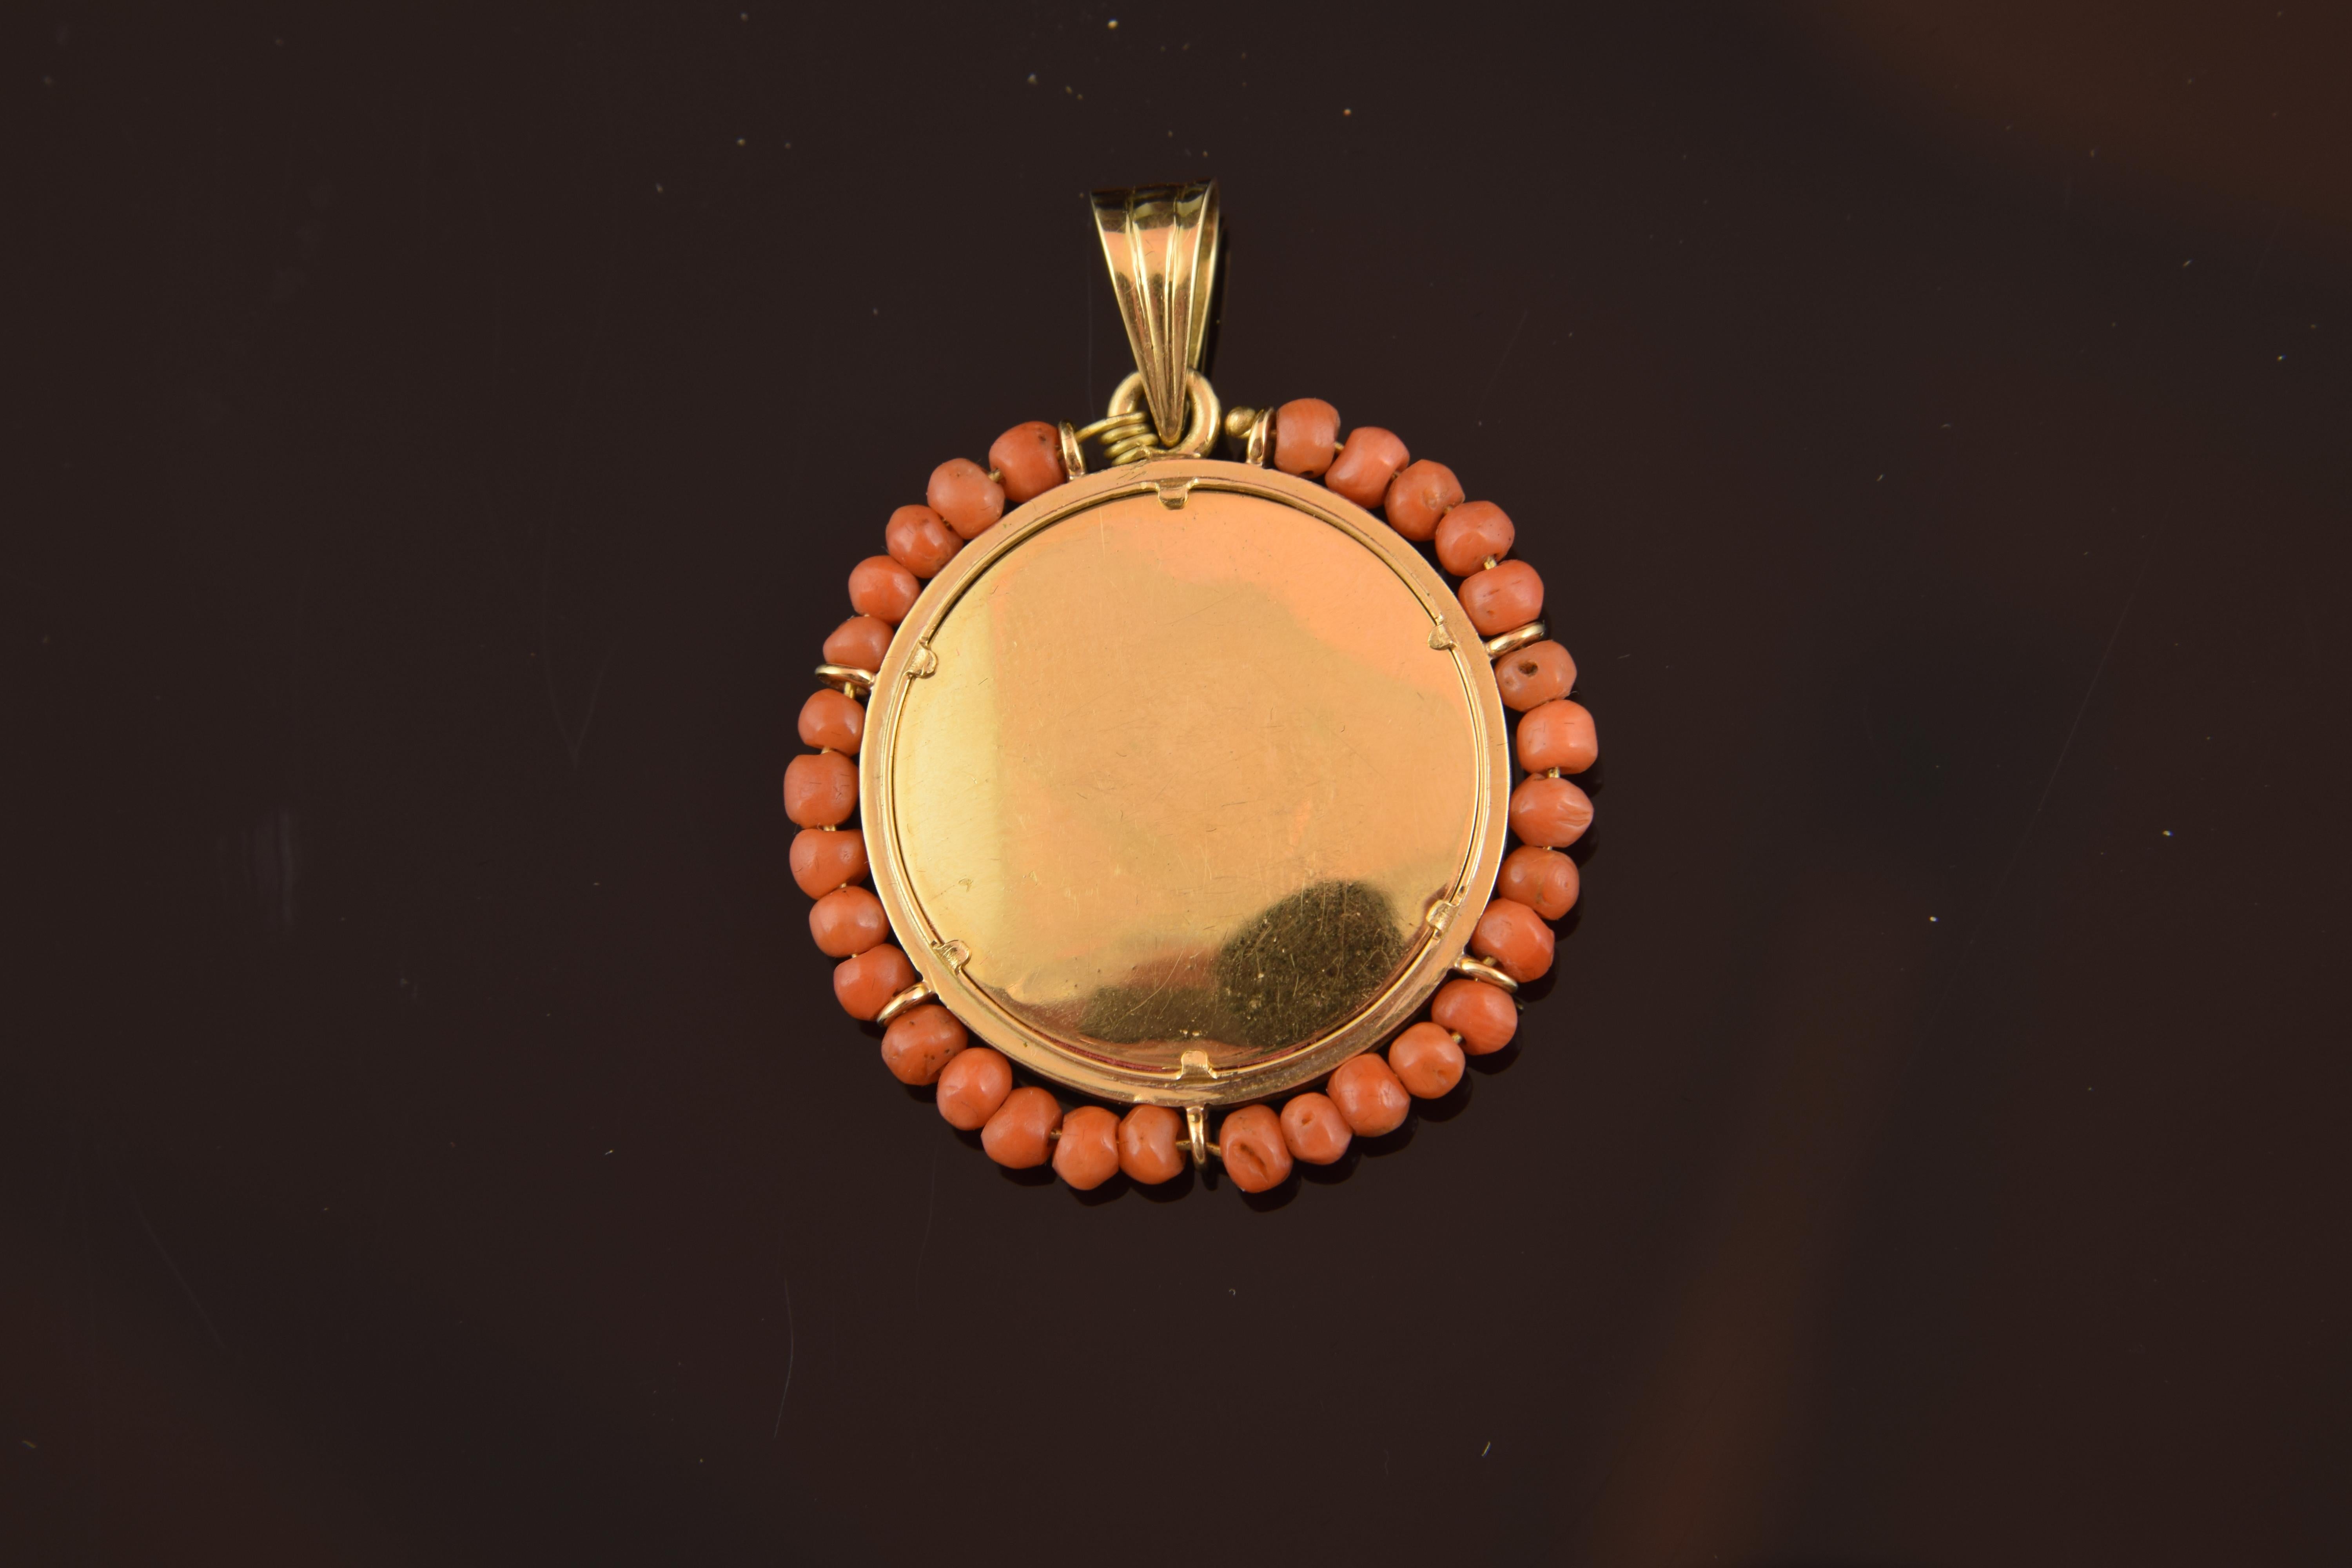 Devotional pendant of enamel on metal that shows, on one side, a bishop with a staff holding a Crucified in his hands, and the other side smooth, with the metal in view. It has been highlighted and decorated with a string of carved coral pearls. It